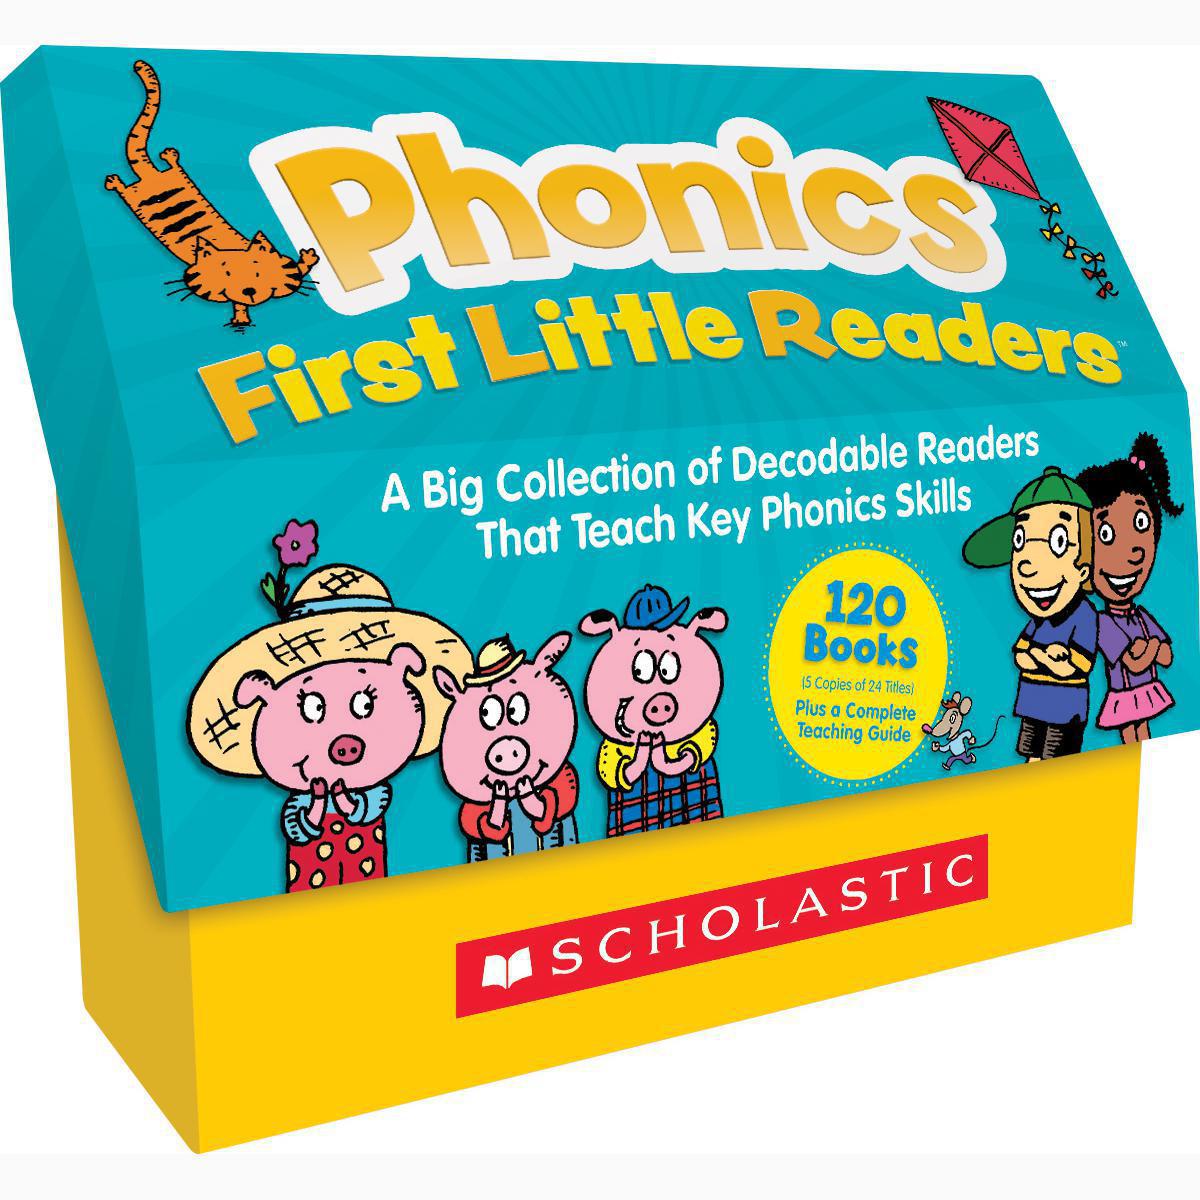  Phonics First Little Readers: A Big Collection of Decodable Readers That Teach Key Phonics Skills 